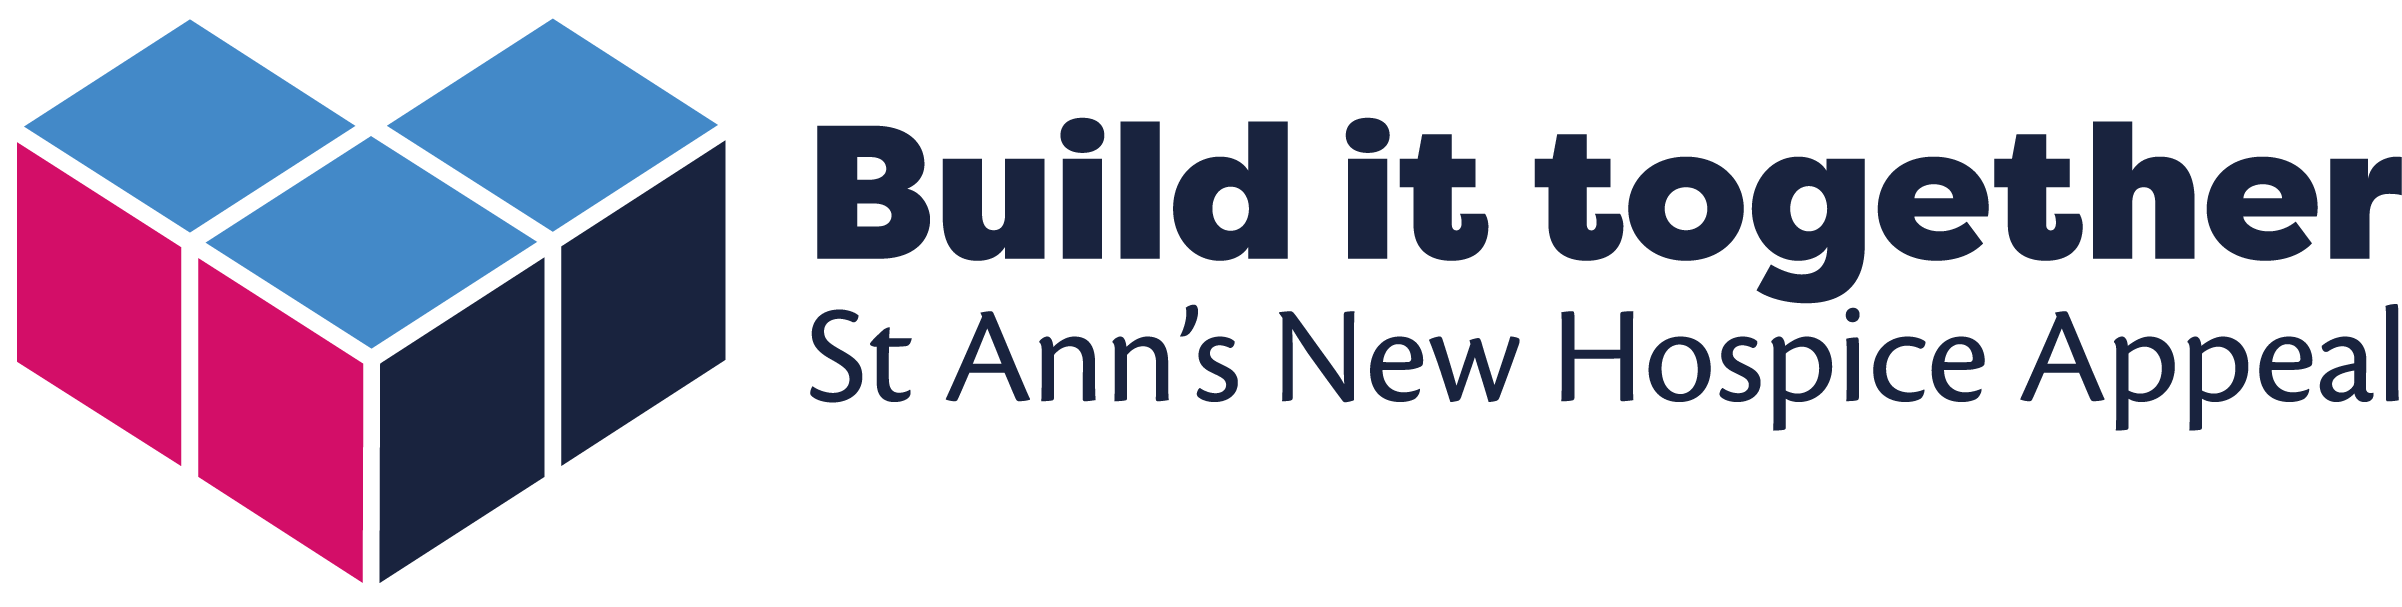 St Ann's Hospice build it together logo